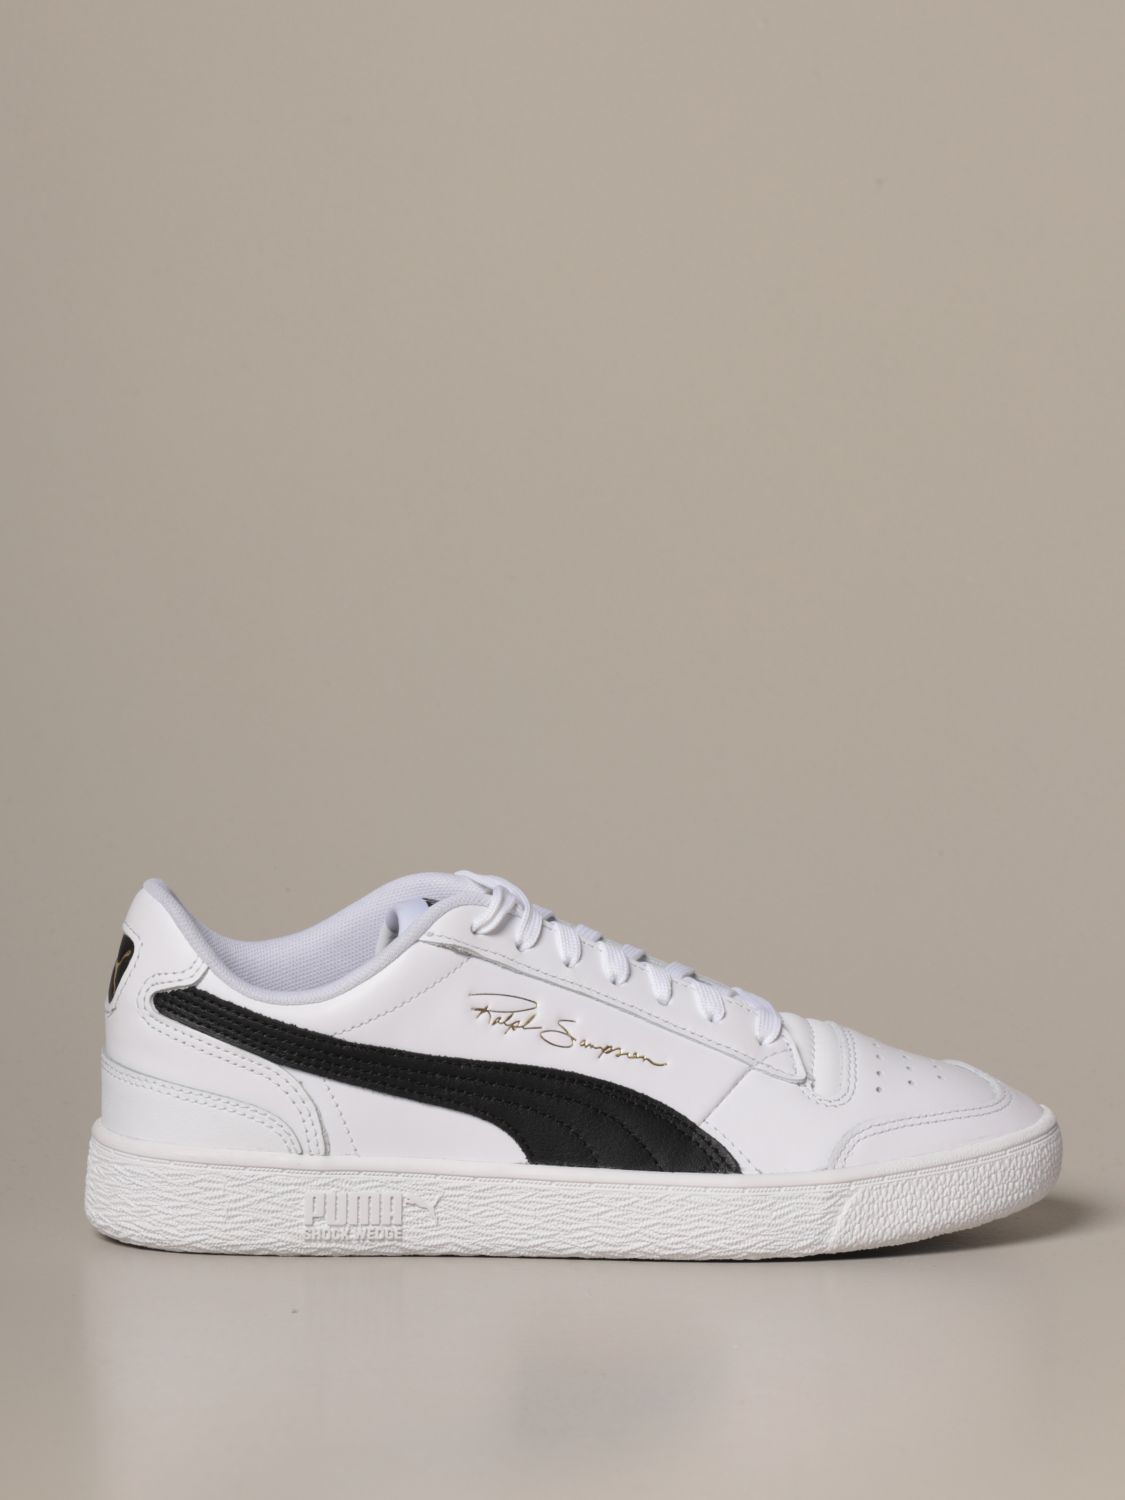 puma leather sneakers mens